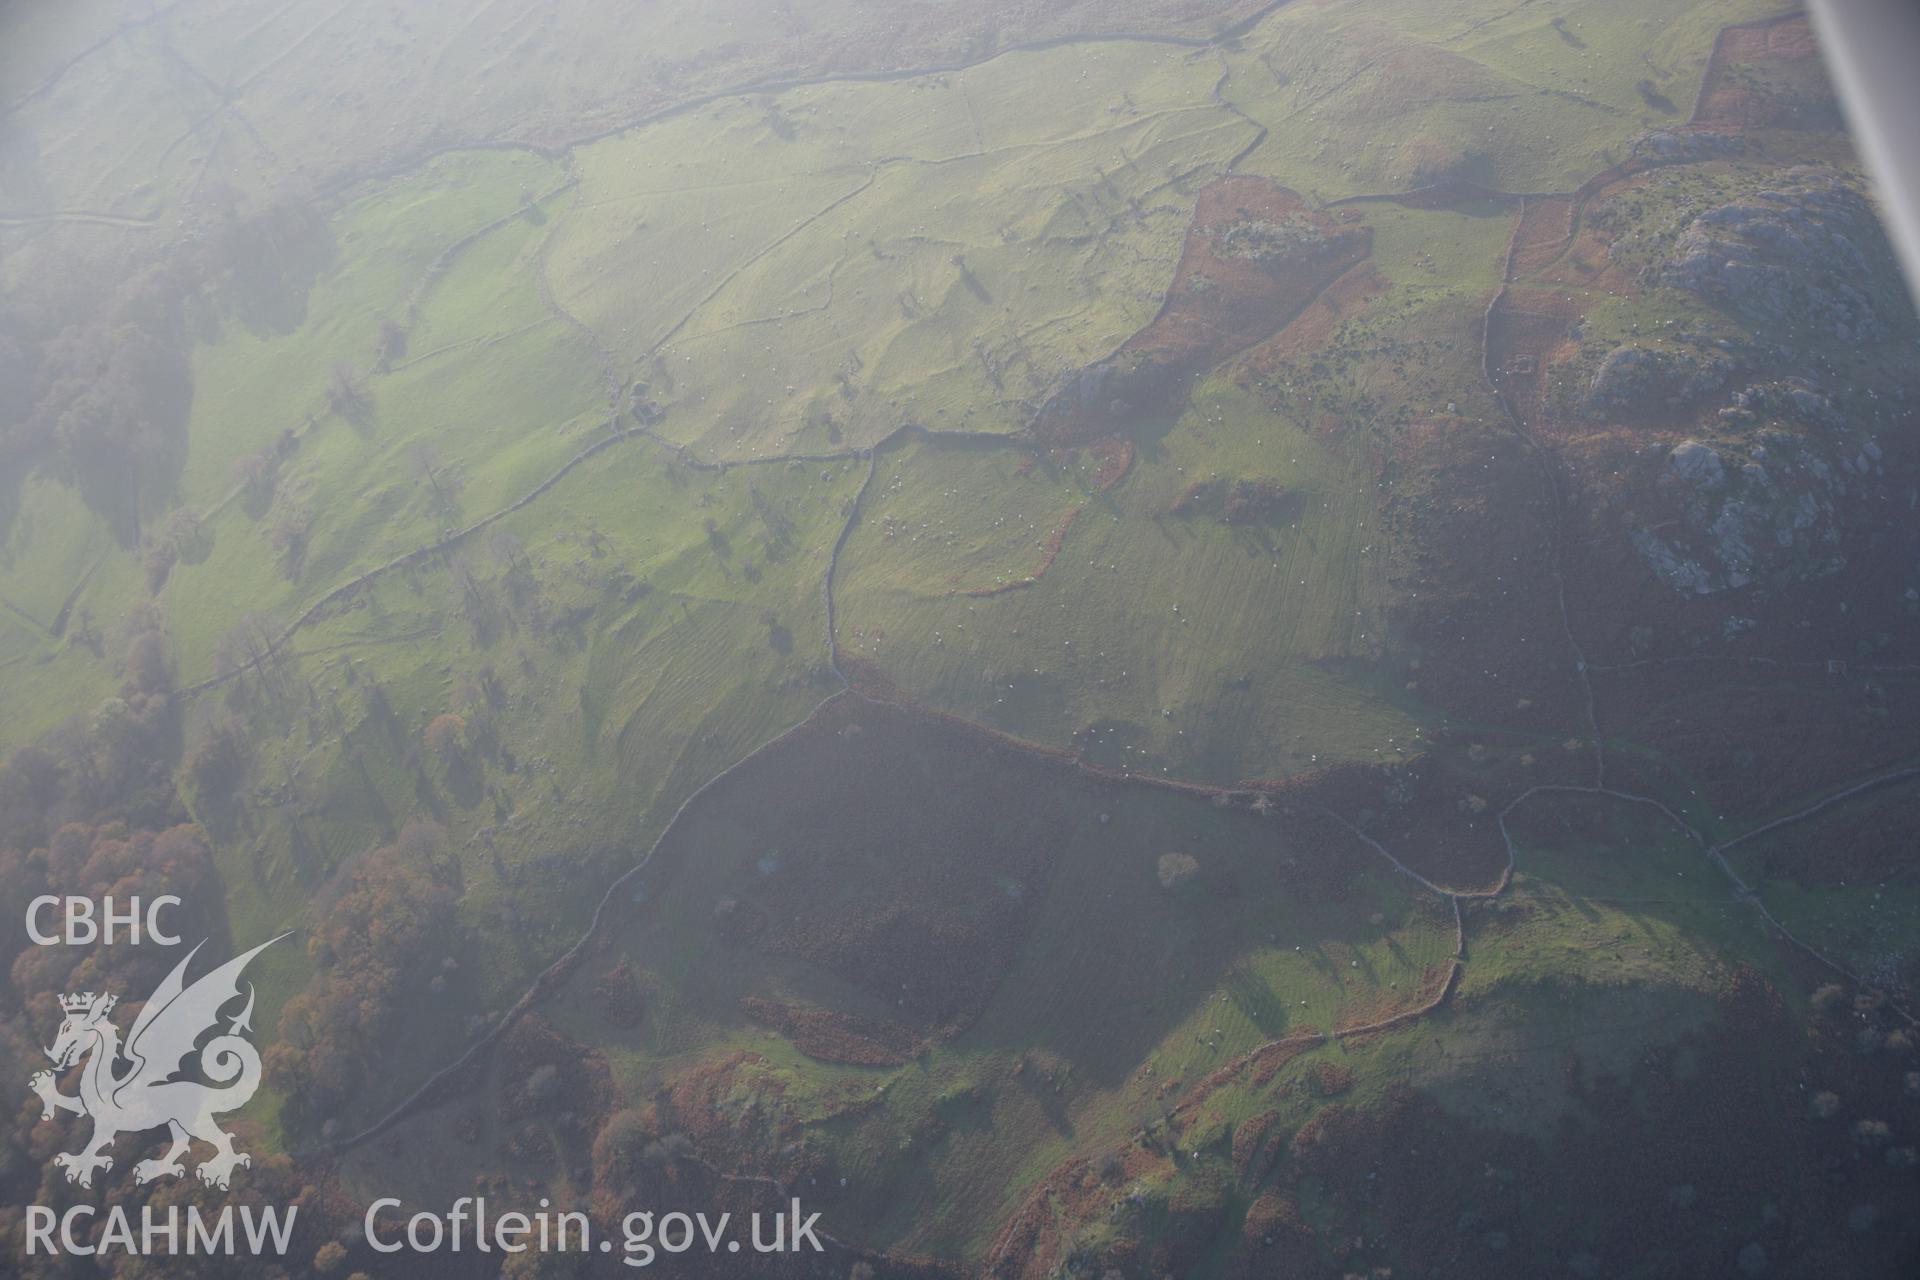 RCAHMW colour oblique aerial photograph of Caer Bach Hillfort. Taken on 21 November 2005 by Toby Driver